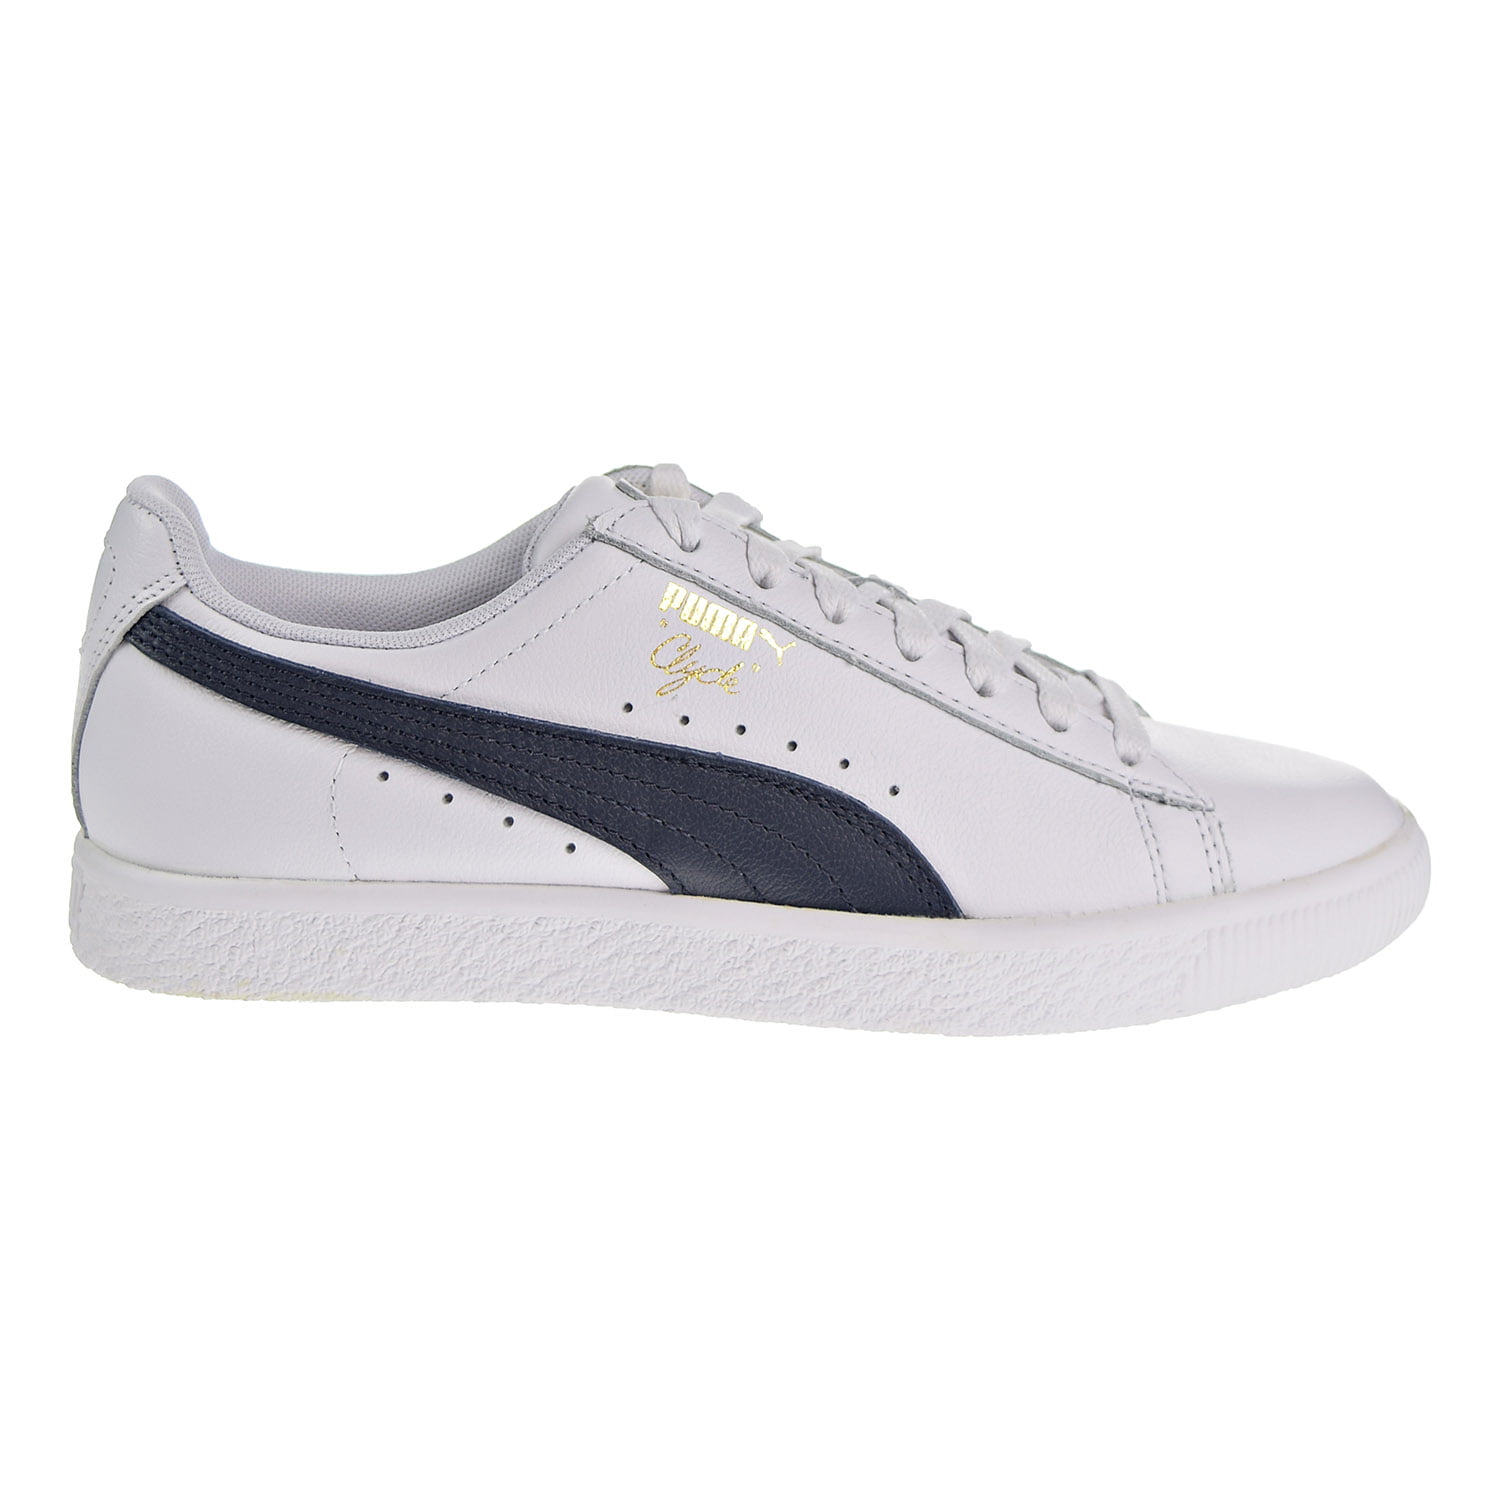 Shoes White/Navy/Team Gold 364670-02 